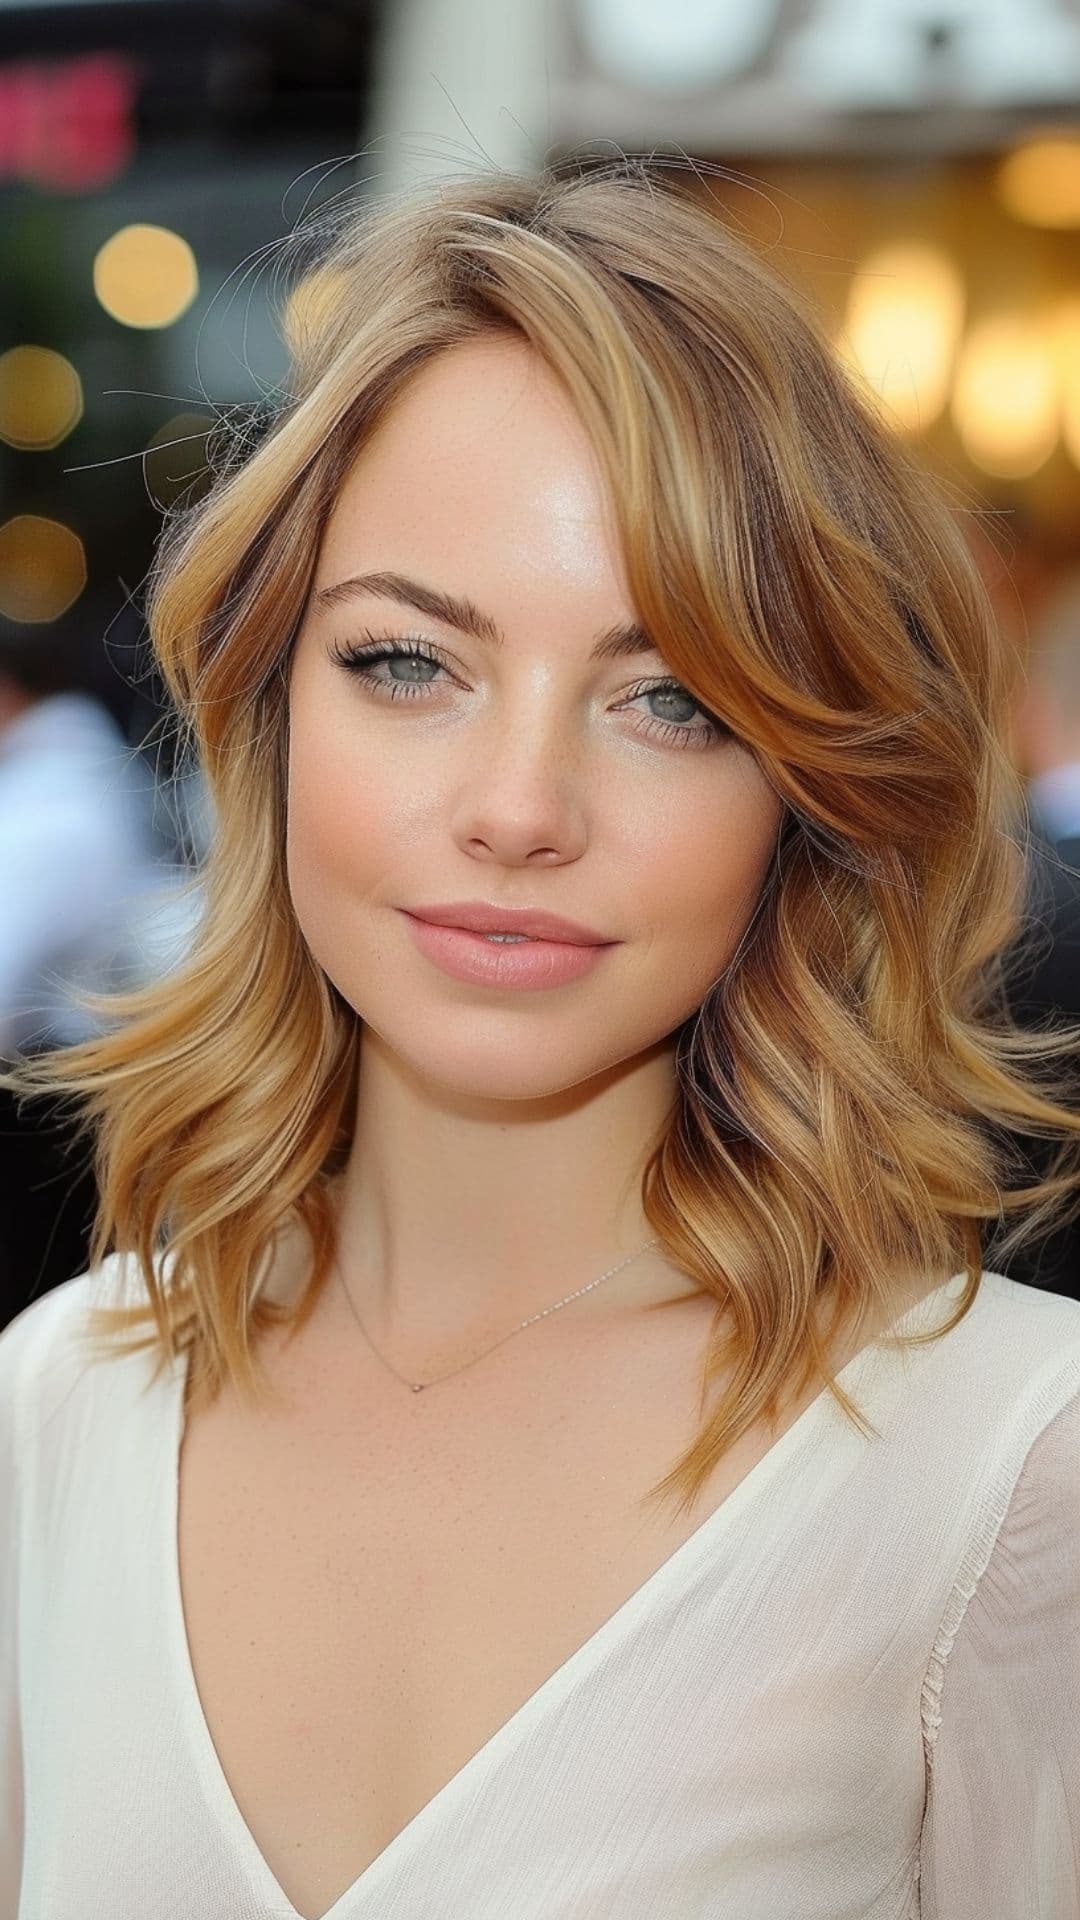 A woman modelling Emma Stone's soft, side-parted curls hairstyle.